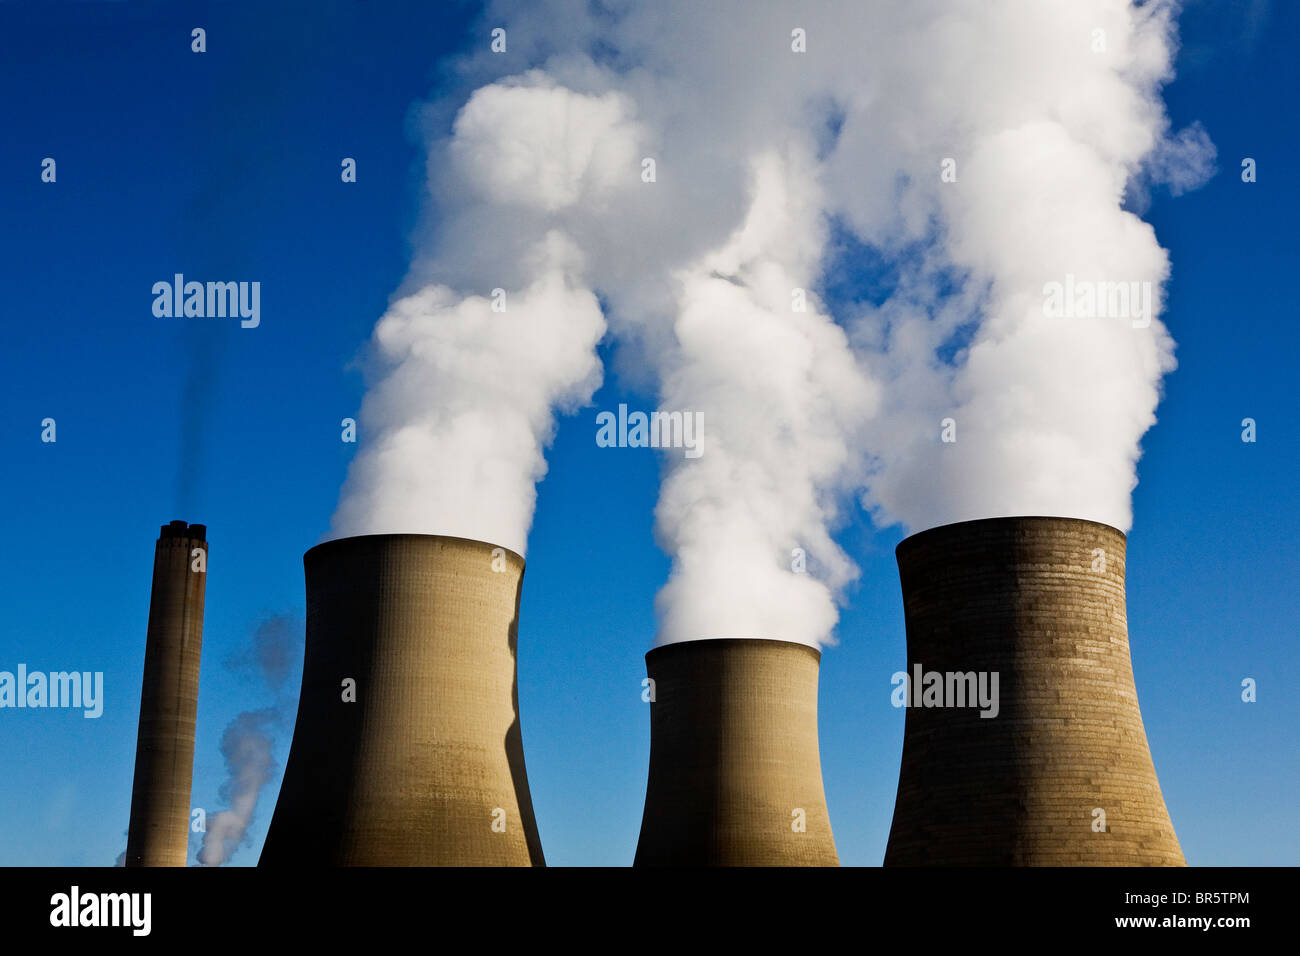 3 cooling towers at Didcot Power Station, a coal-fired station. Oxfordshire, UK. Stock Photo